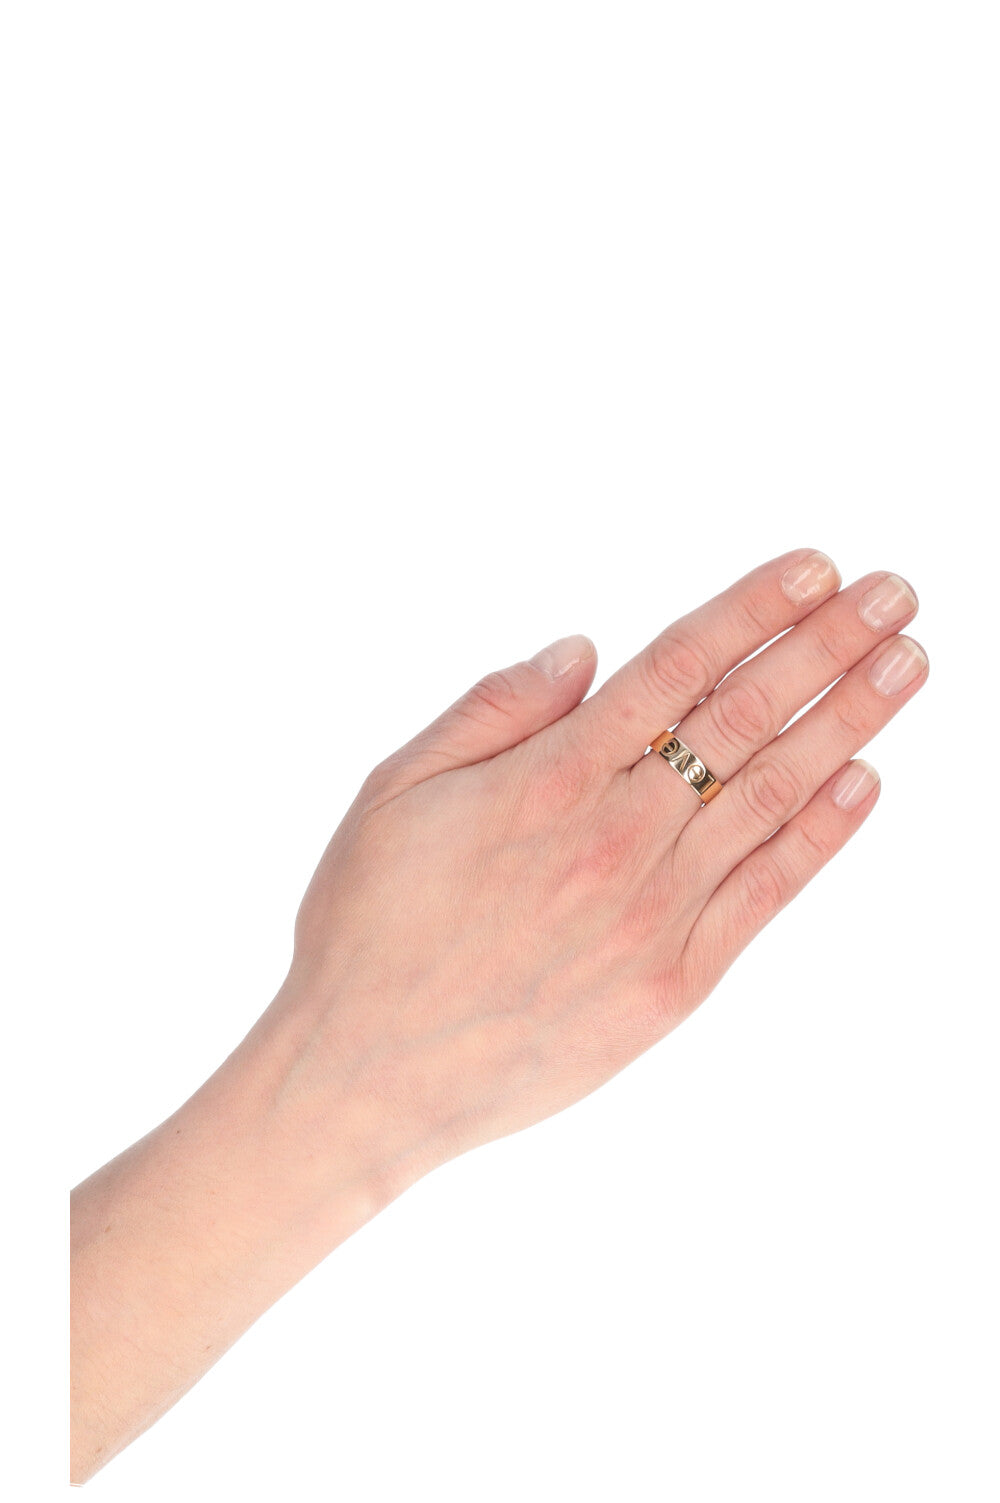 CARTIER Love Ring Yellow Gold